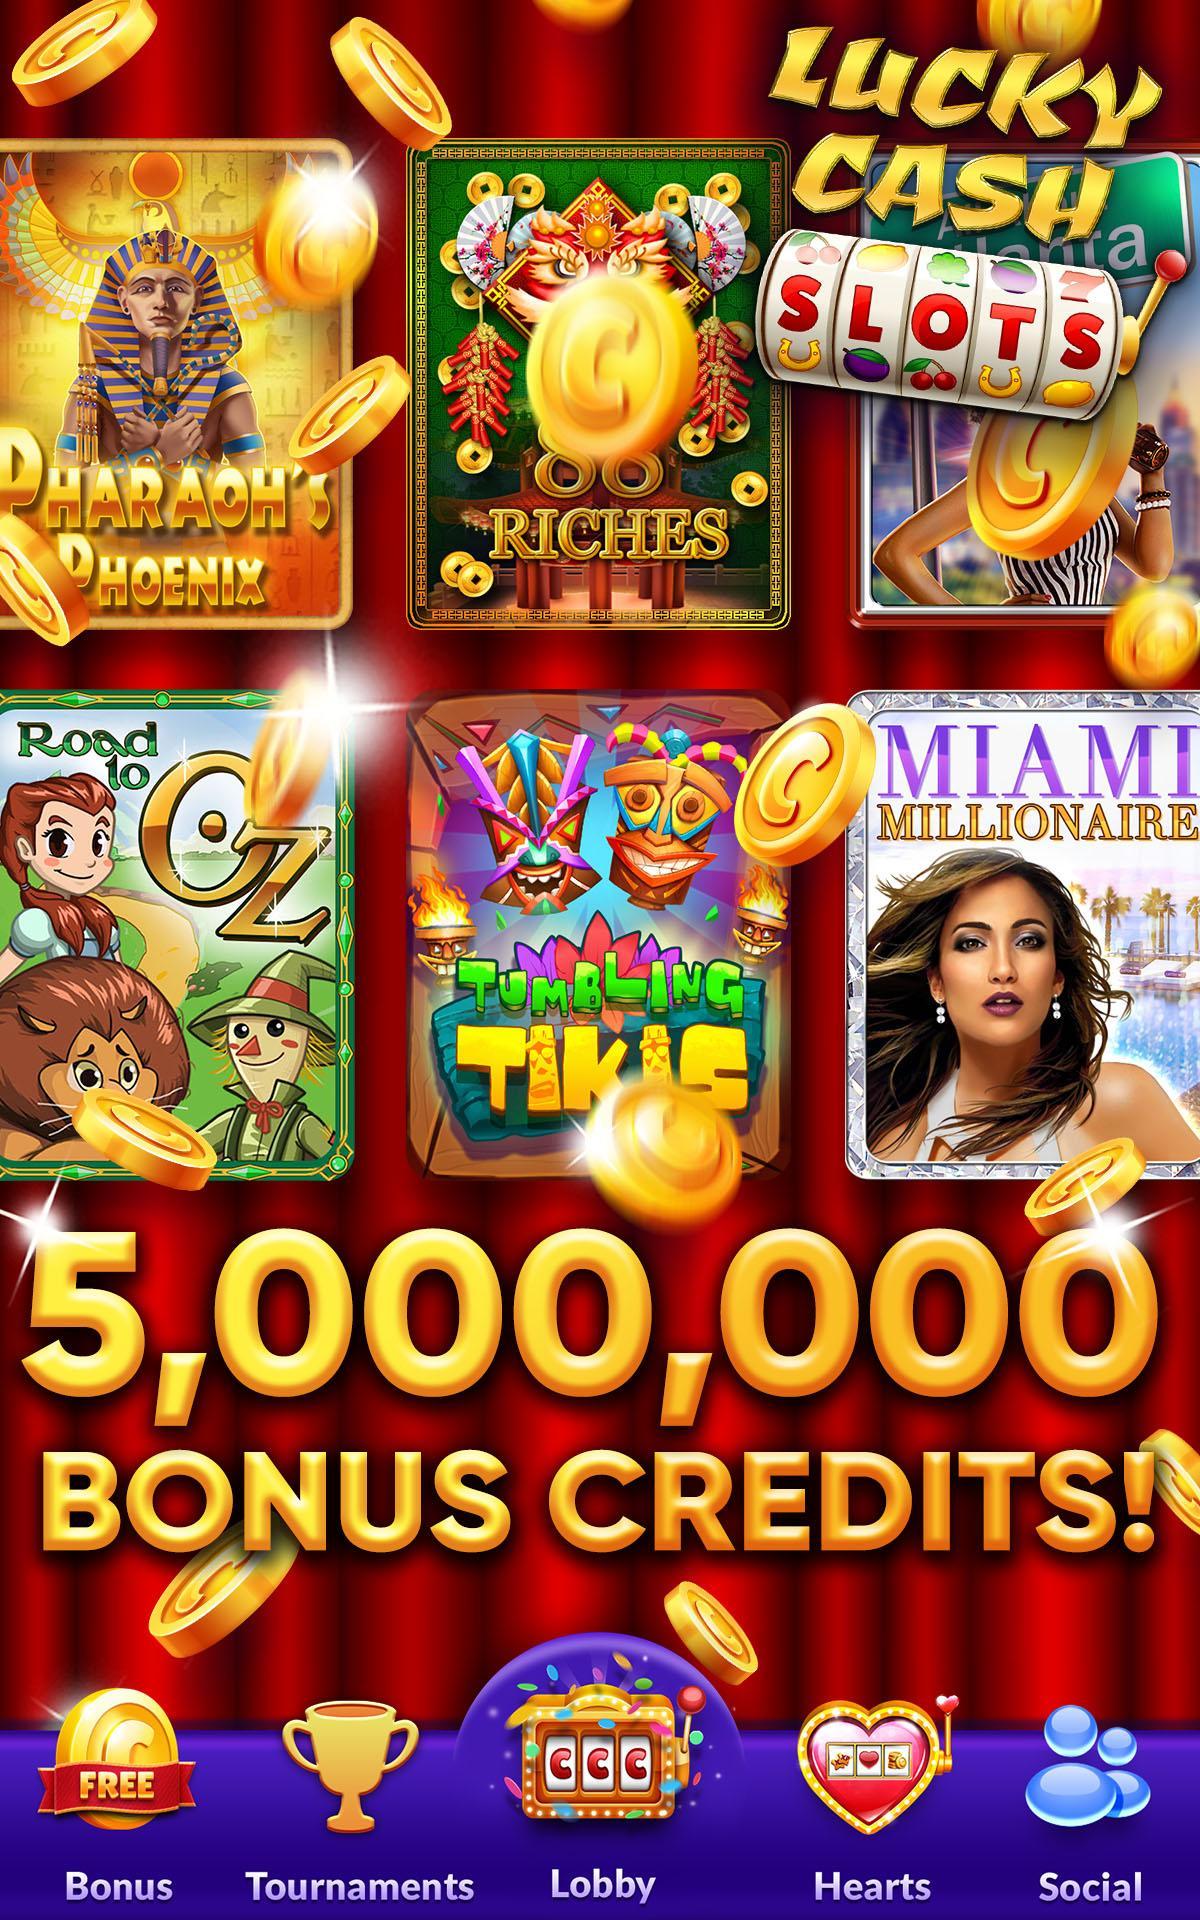 Win Real Cash With Free Spins Top Slot Site's Exclusive Offers